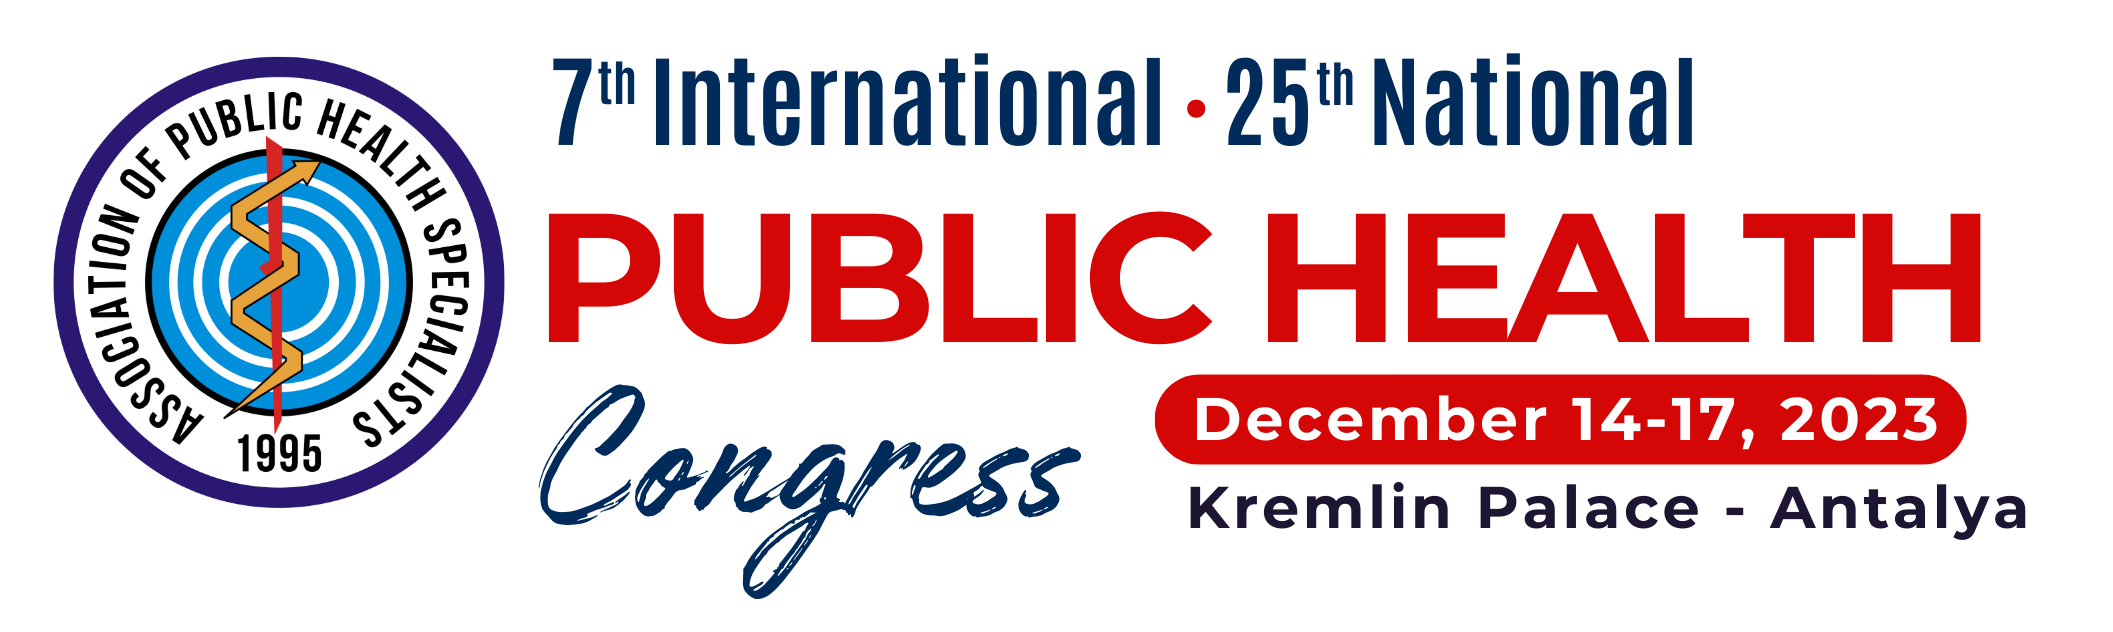 7th International and 25th National Congress on Public Health